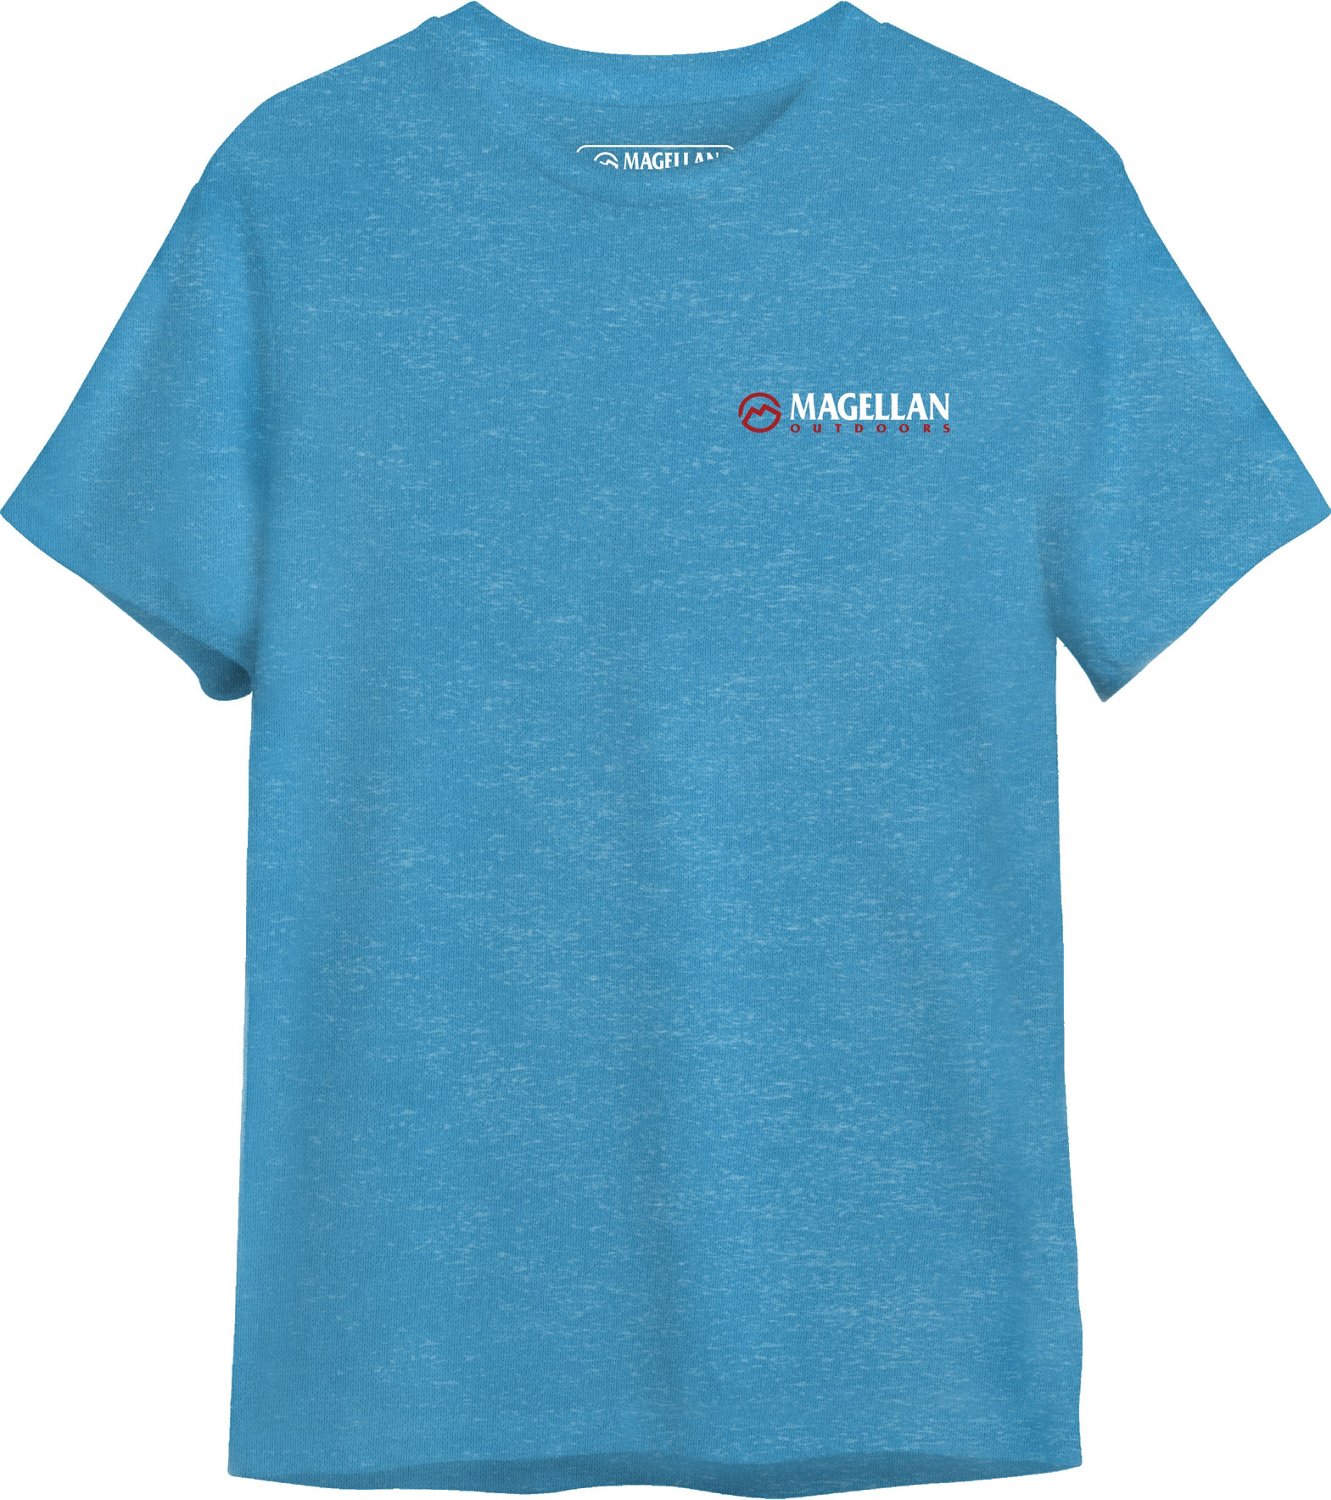 Magellan Pit Tops & T-Shirts for Boys Sizes (4+)